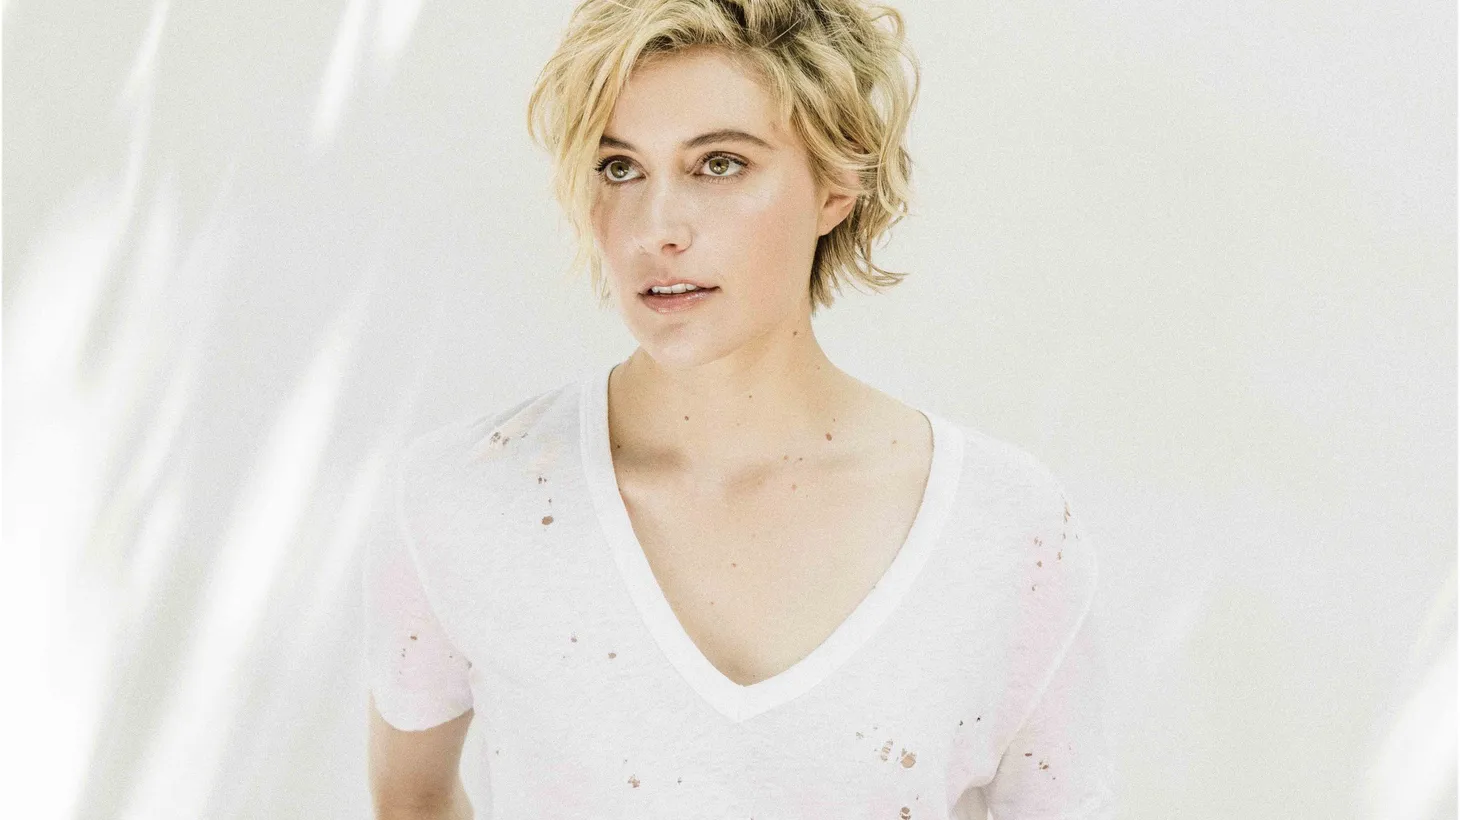 Actress, screenwriter, and filmmaker Greta Gerwig describes herself as a person who “lives with very vivid emotions” and she gravitates towards musicians who are like that as well, from Kate Bush and Judee Sill to Brian Eno.